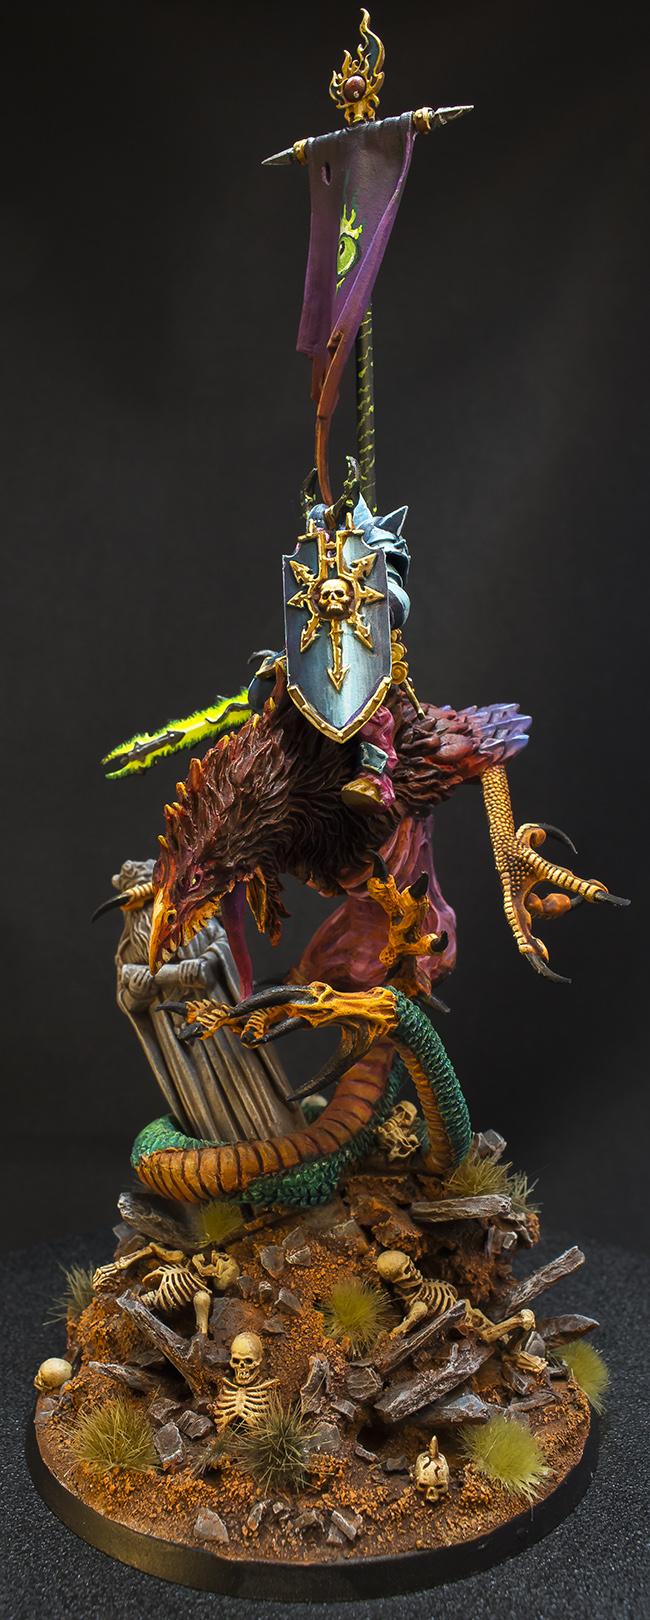 Age Of Sigmar, Chaos, Cockatrisse, Conversion, Daemonic Mount, Lord, Lord Of Tzeentch, Tzeentch, Warriors Of Chaos